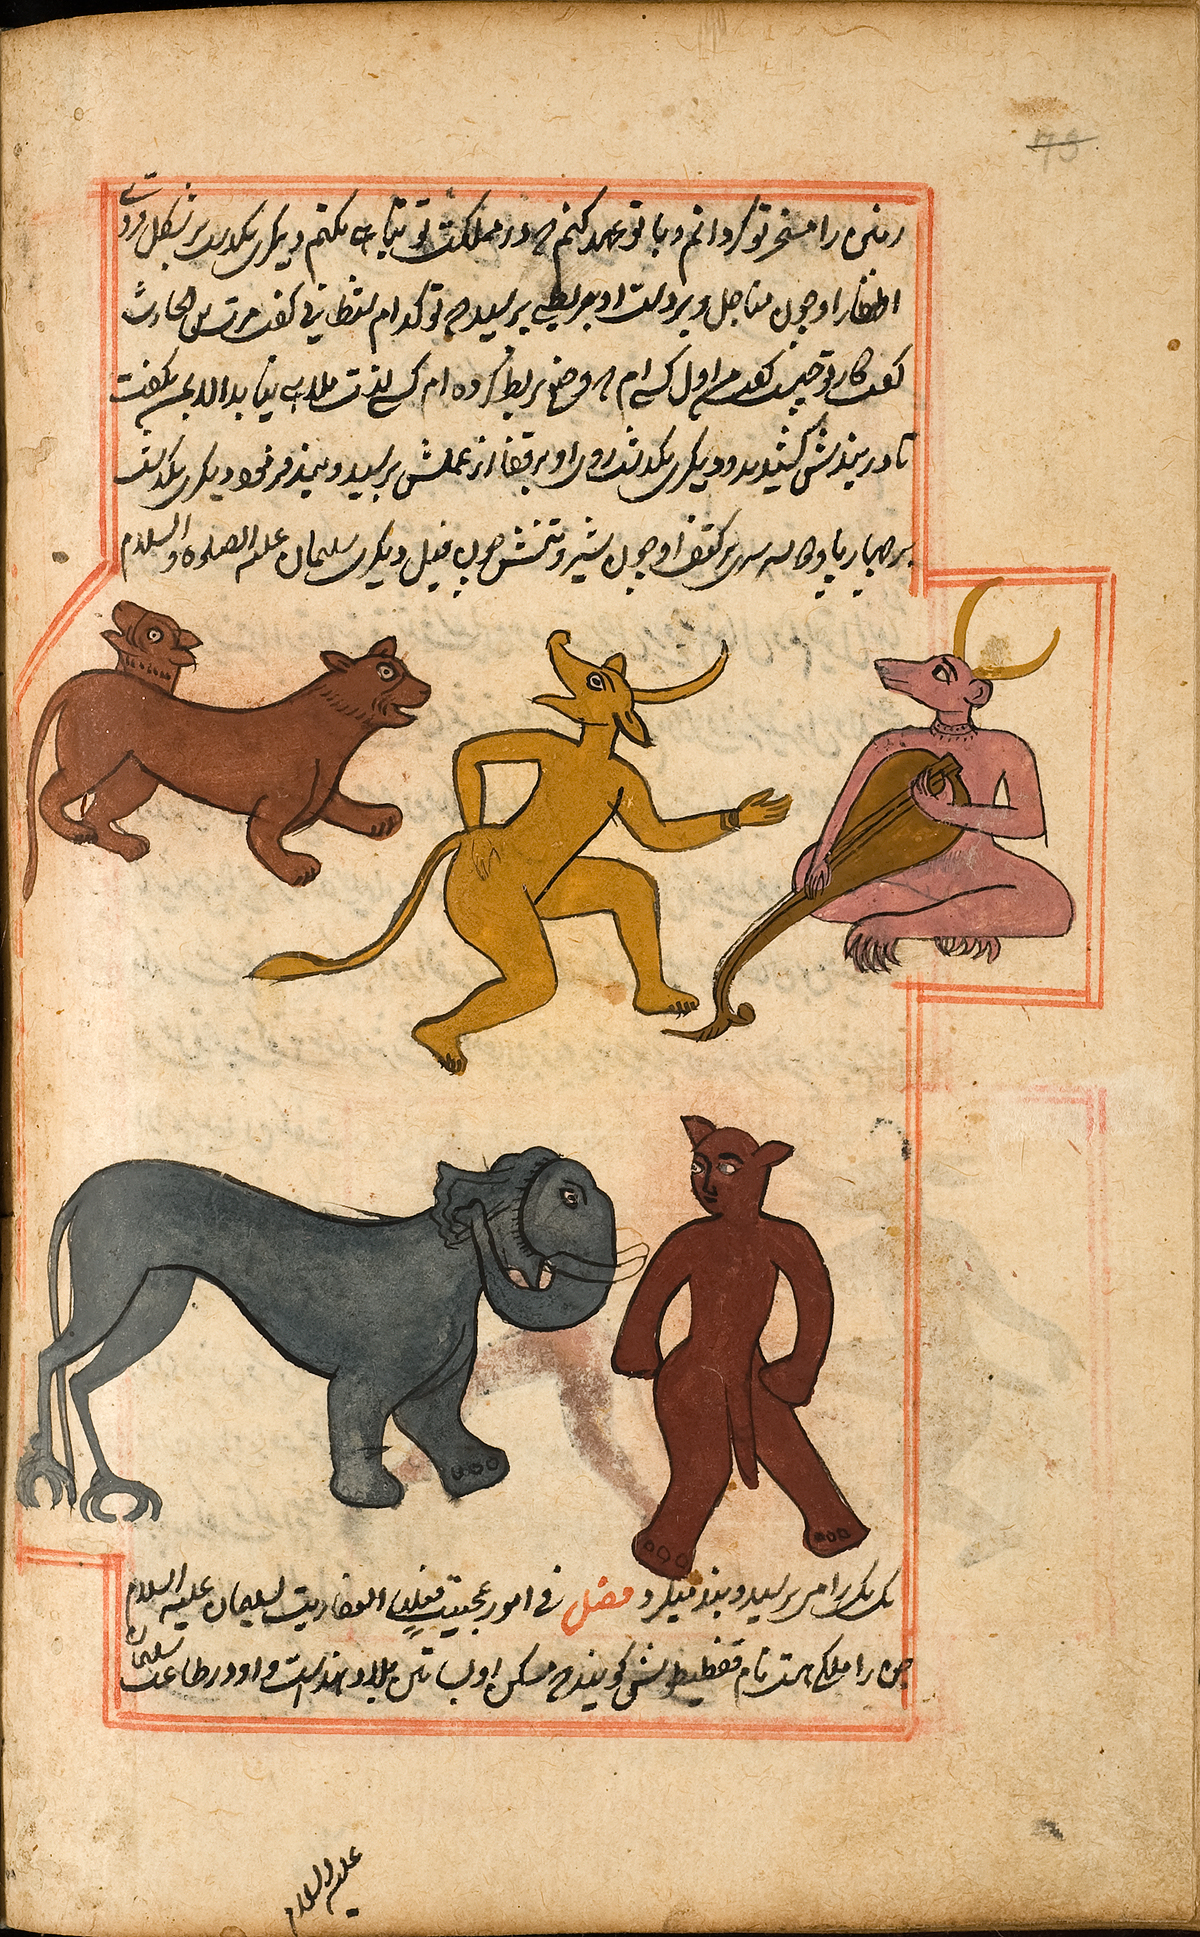 Five jinns, divs, and devils: at the top left is a brown lion-like creature with a second head growing out of its backside; at the top center is a gold humanoid creature with the head of an ox with horns and a long tail, lunging forward as if dancing; at top right is a purple humanoid creature with gold horns on its head, seated and holding a stringed musical instrument resembling a lute; at bottom left is a gray elephant with a skinny belly and claw-like talons as hind legs; and at bottom right is a brown creature standing upright with elephant-like feet but a small cat-like head.  The images are surrounded by Persian text and a red double ruled border.